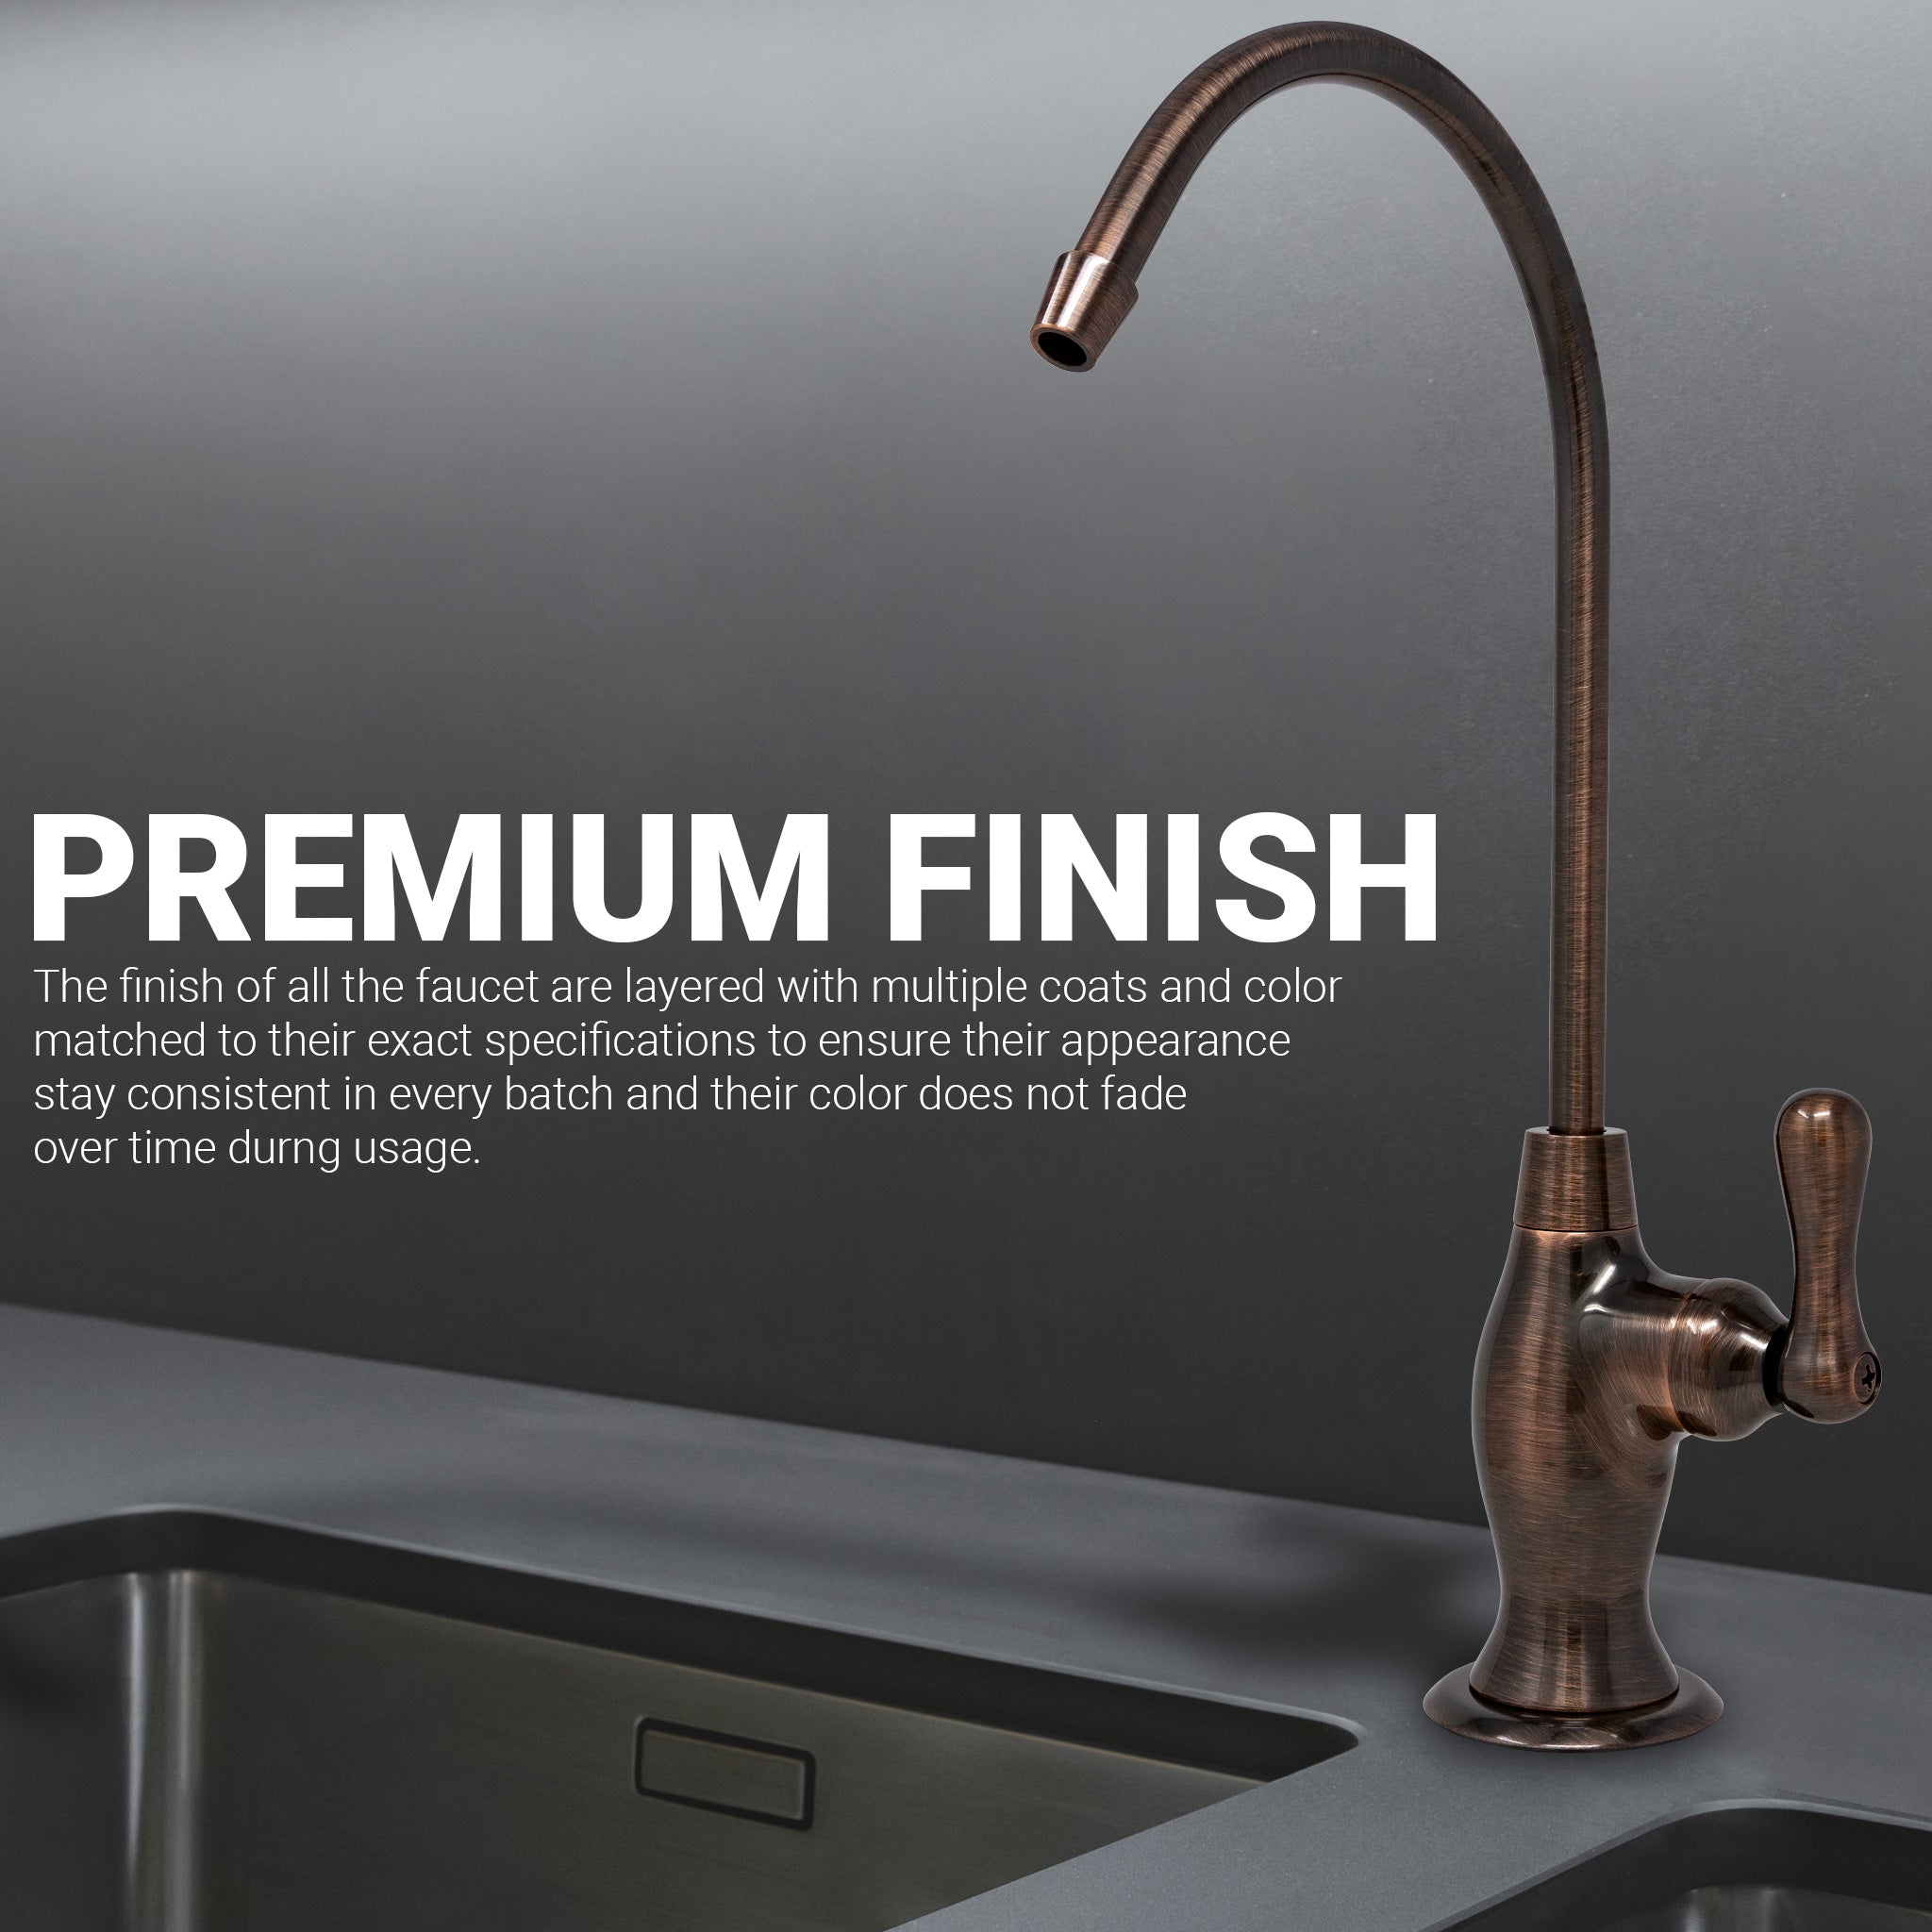 Water Filtration Faucet Vase Style Antique Wine Reverse Osmosis Non Air Gap. Certified by NSF.